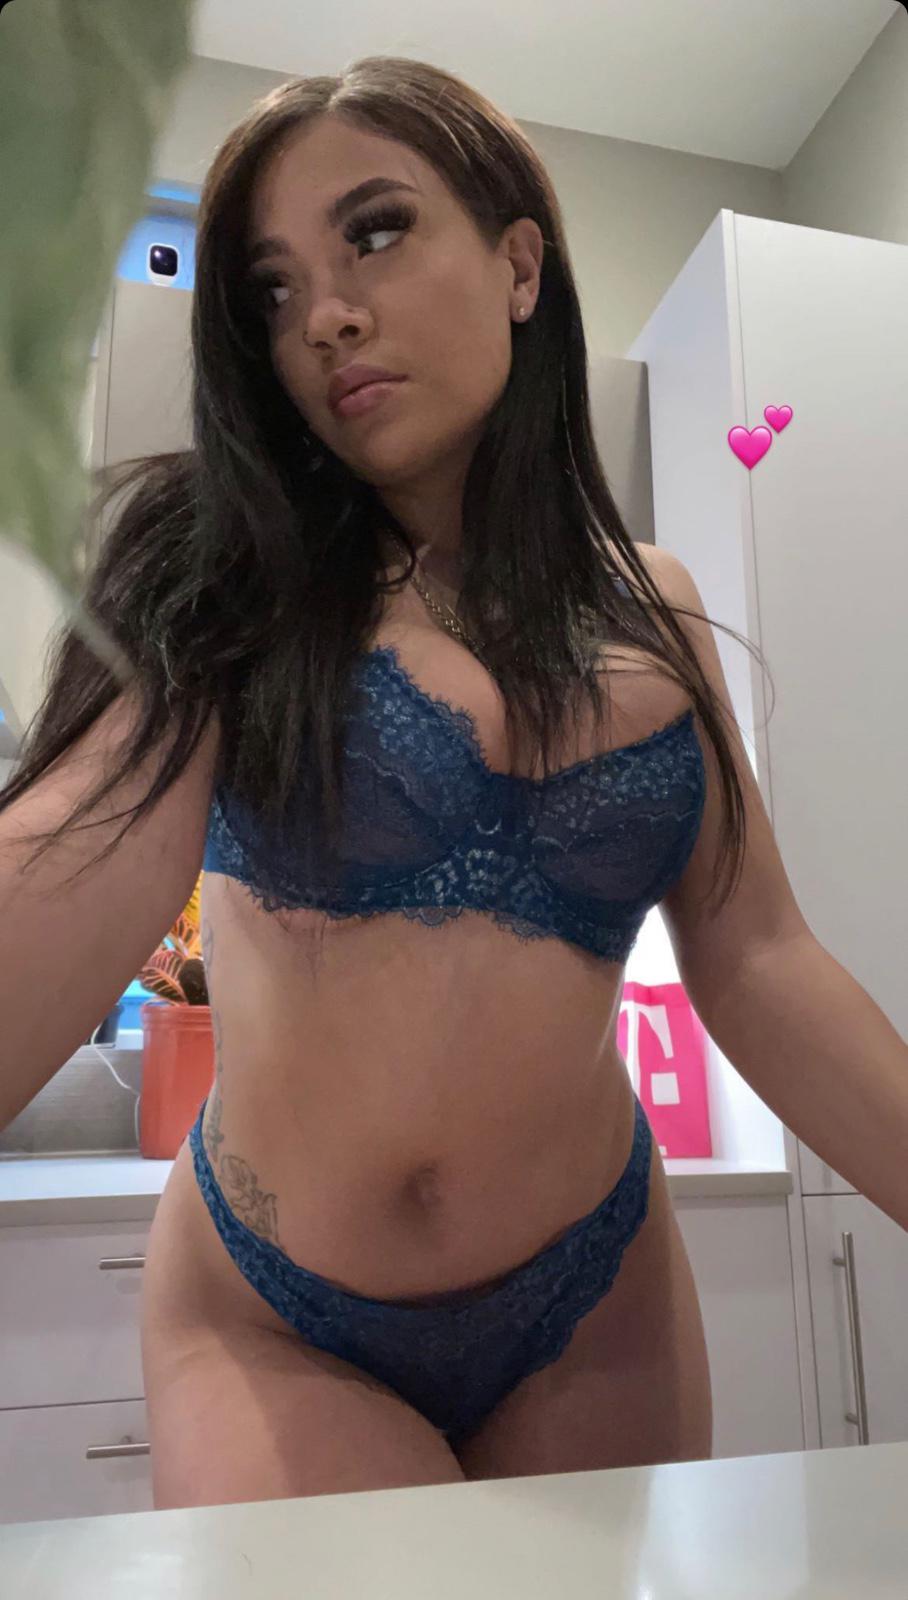 COME🥰HAVE SOME UNFORGETTABLE 🌚SEXUAL SATISFACTION 😋HERE👅 (440) 682-0231